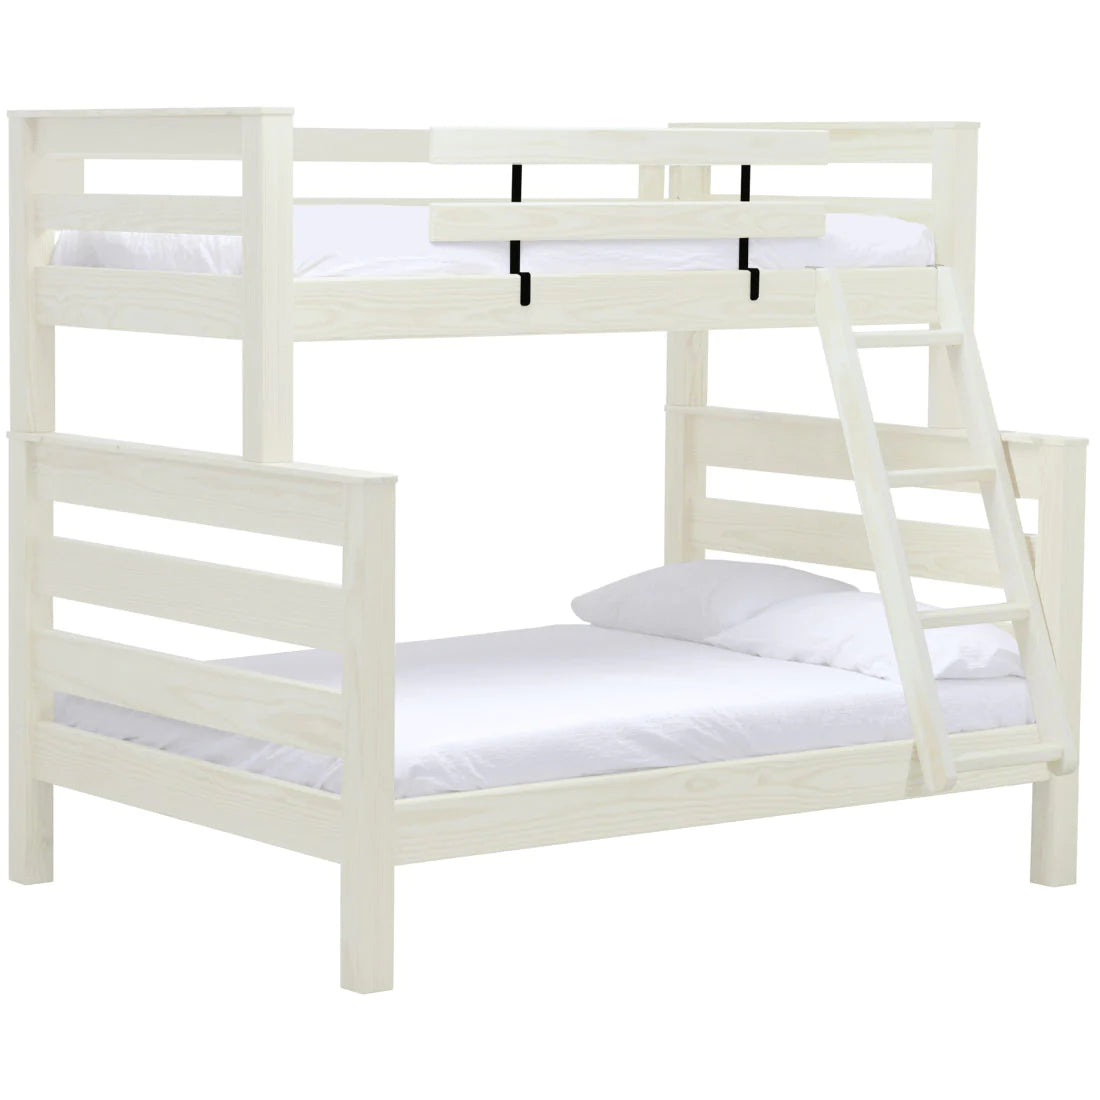 TimberFrame Bunk Twin over Double